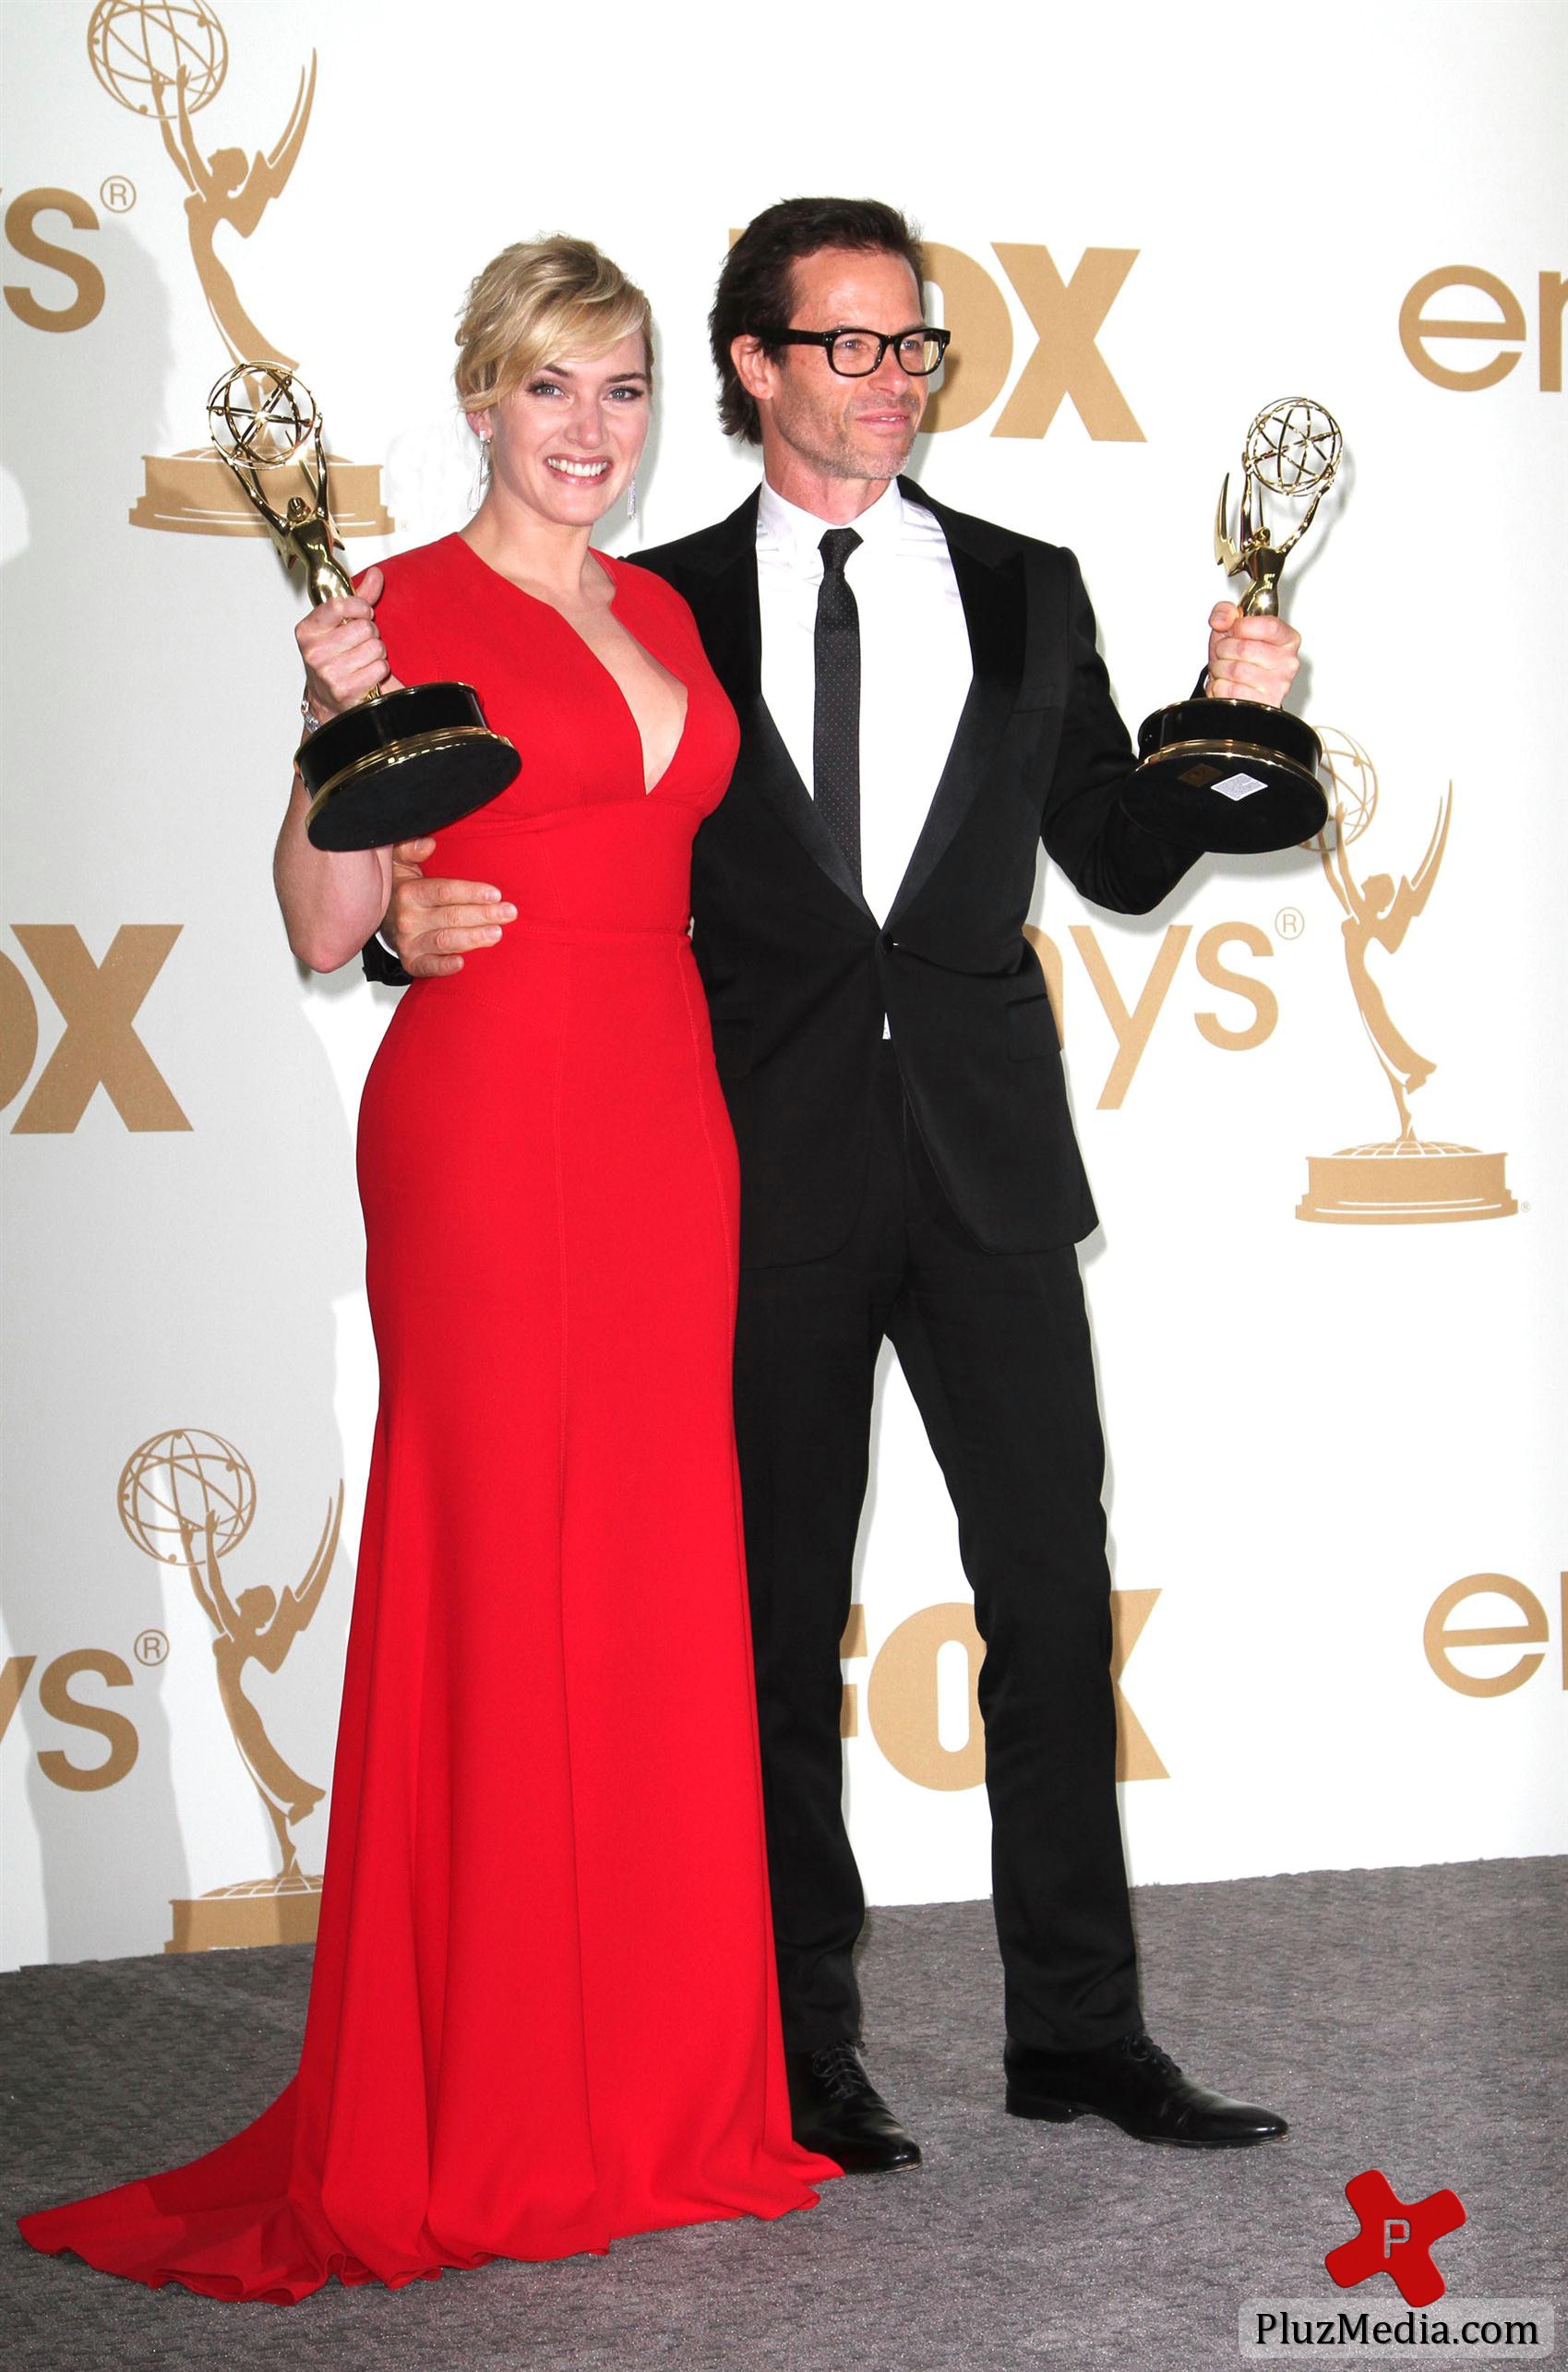 63rd Primetime Emmy Awards held at the Nokia Theater LA LIVE photos | Picture 81248